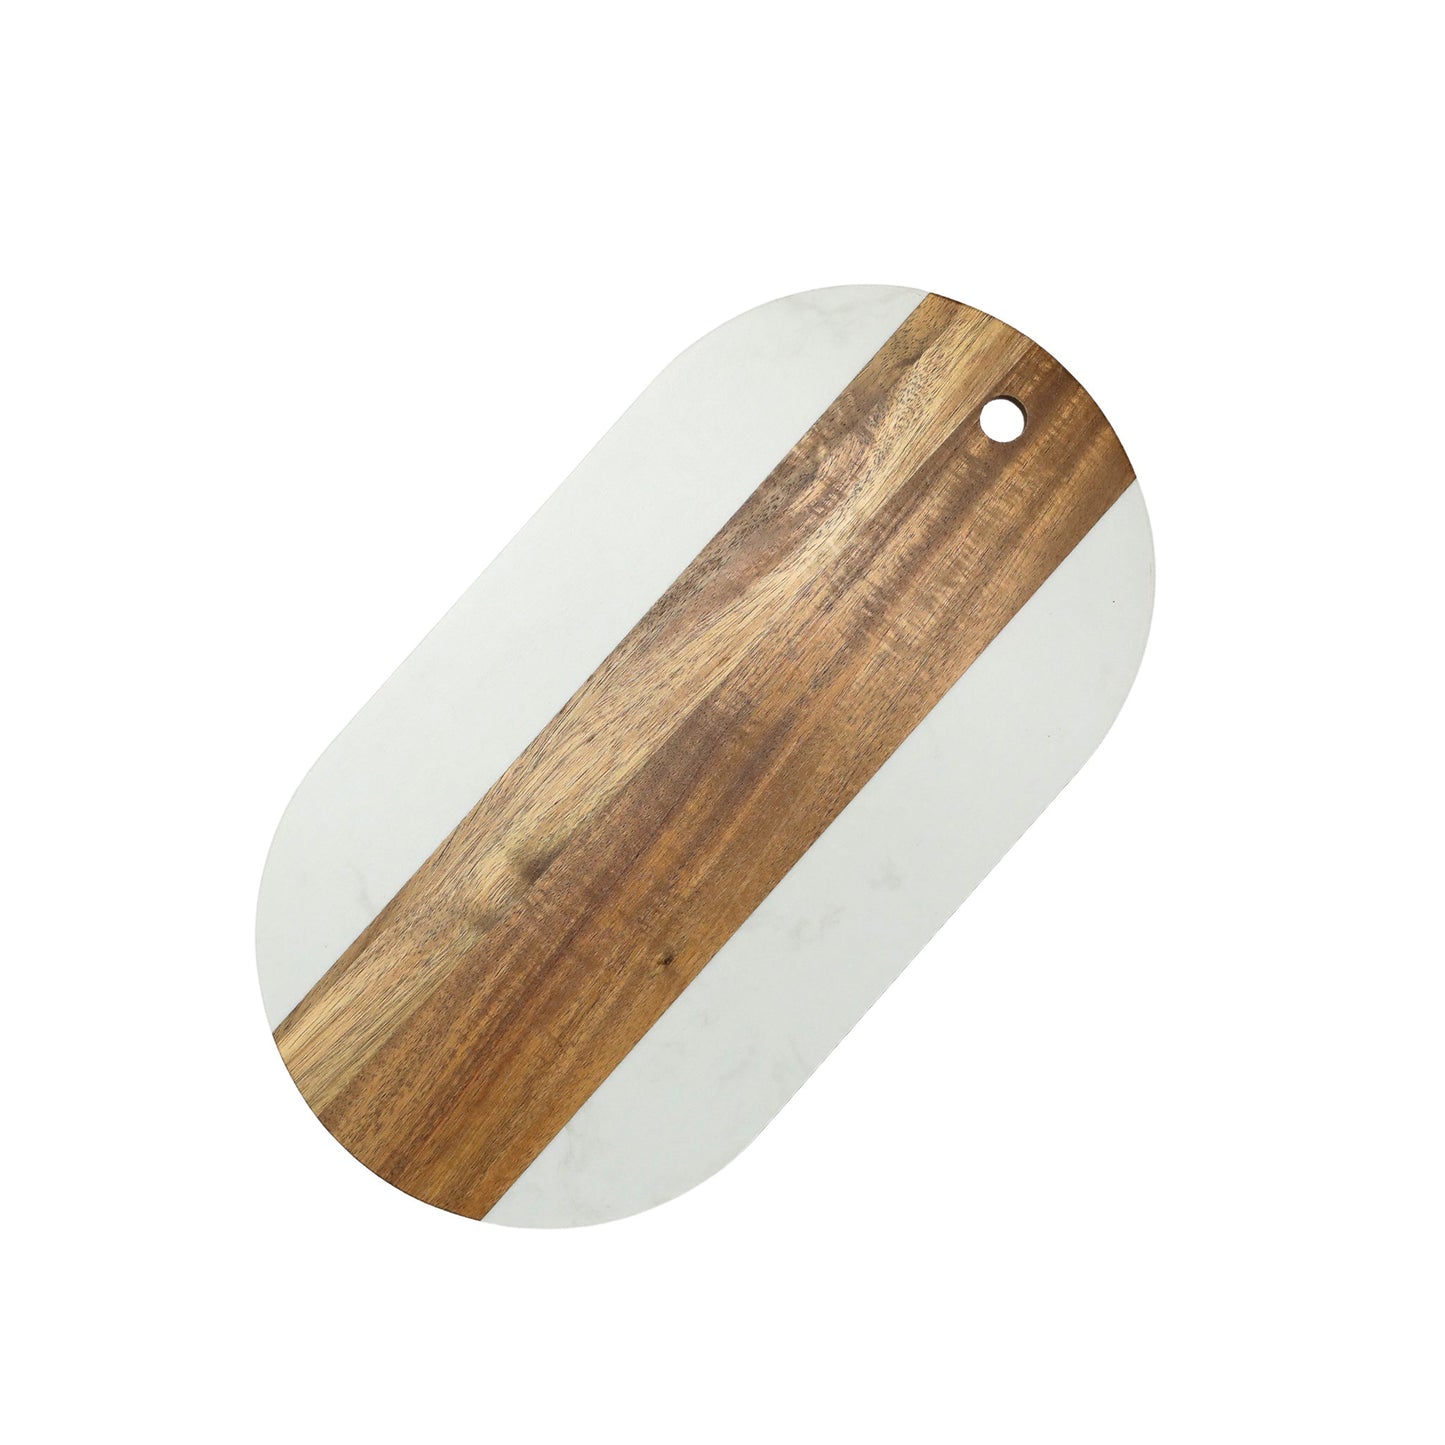 White Marble and Acacia Wood Oval Board by Creative Gifts